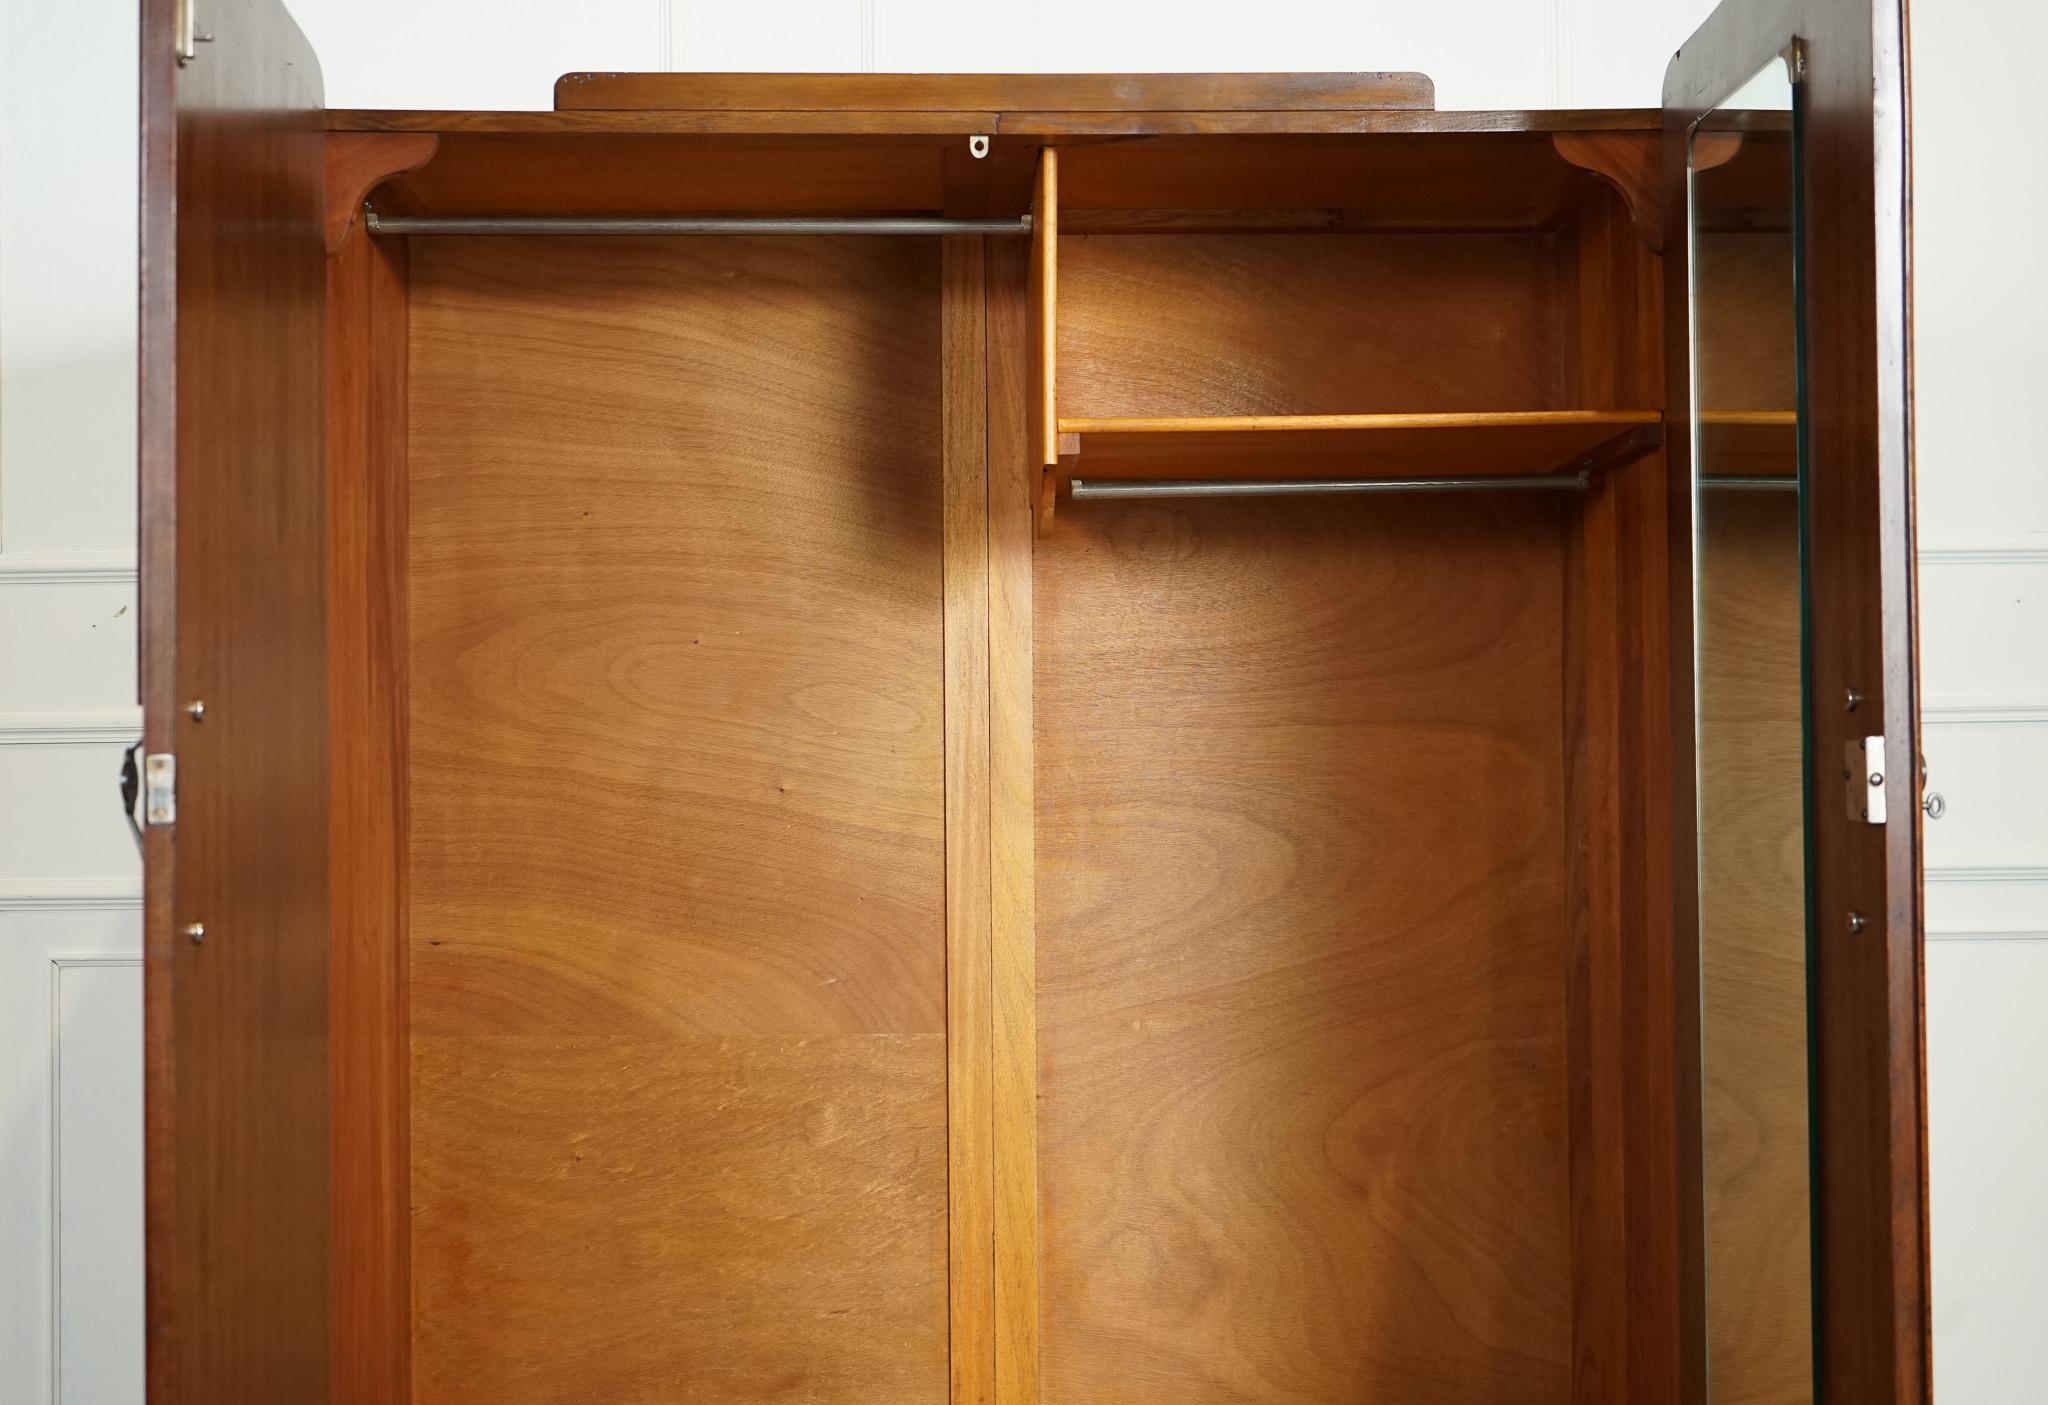 LOVELY ViNTAGE ART DECO WARDROBE J1 In Good Condition For Sale In Pulborough, GB